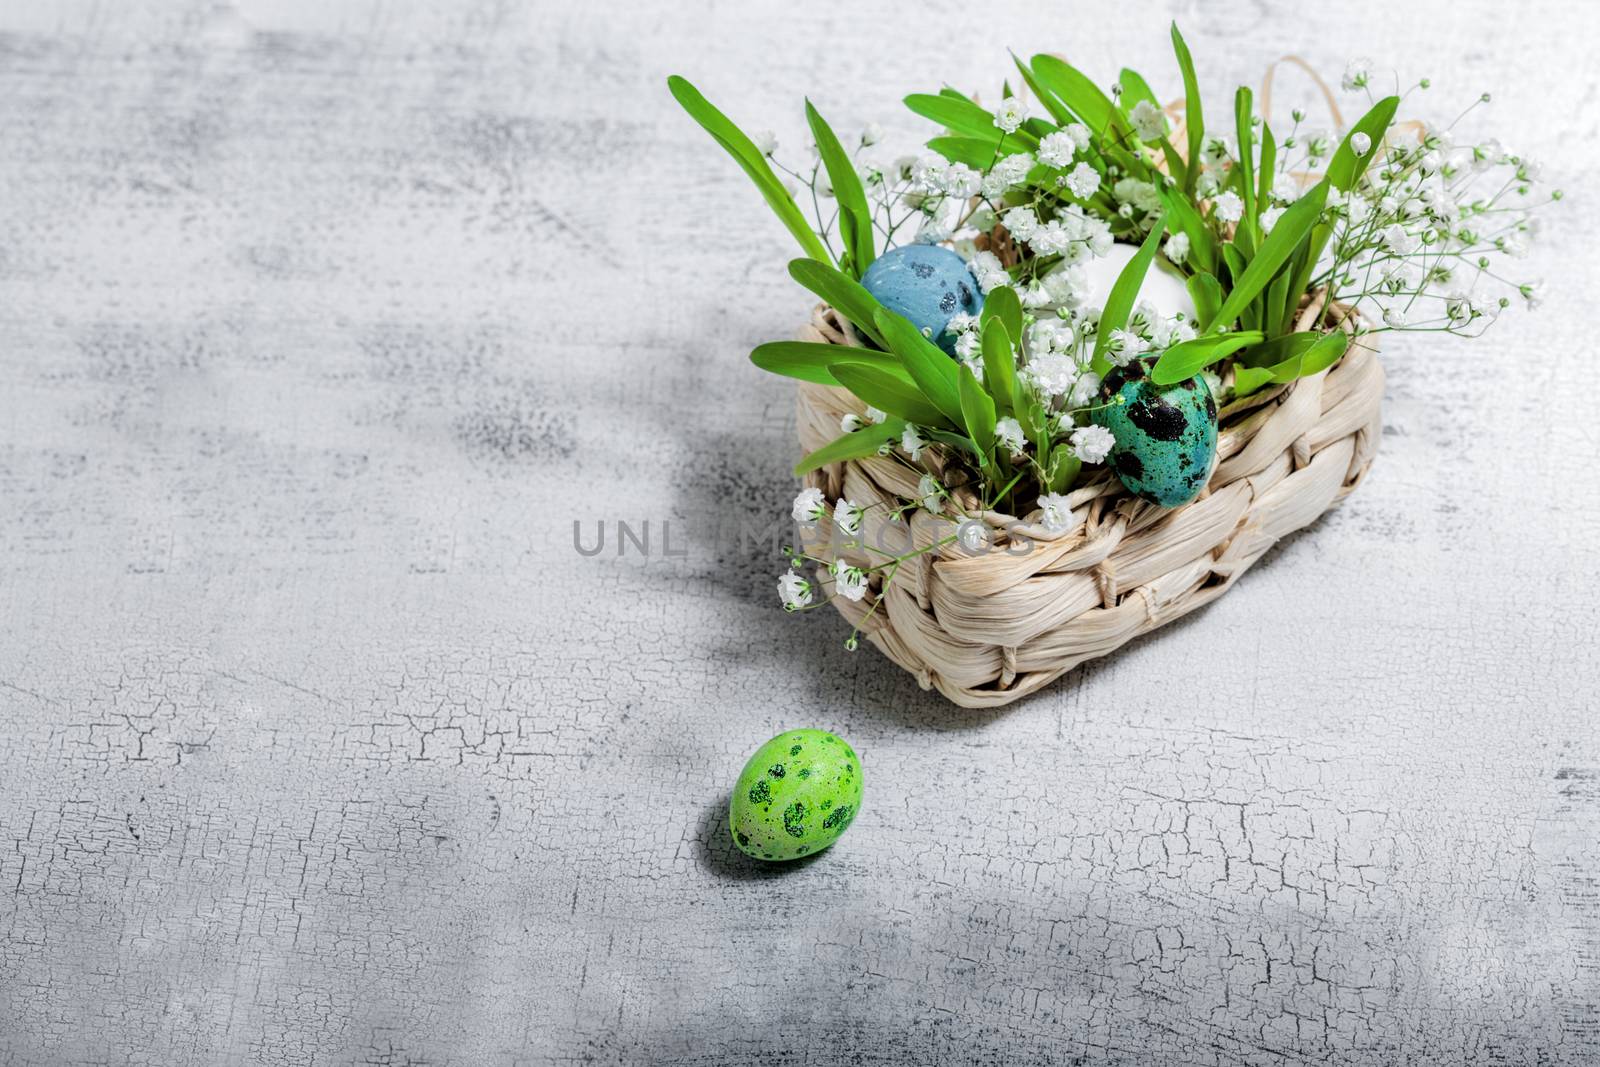 Eggs with flowers on a white background. Easter Symbols by supercat67